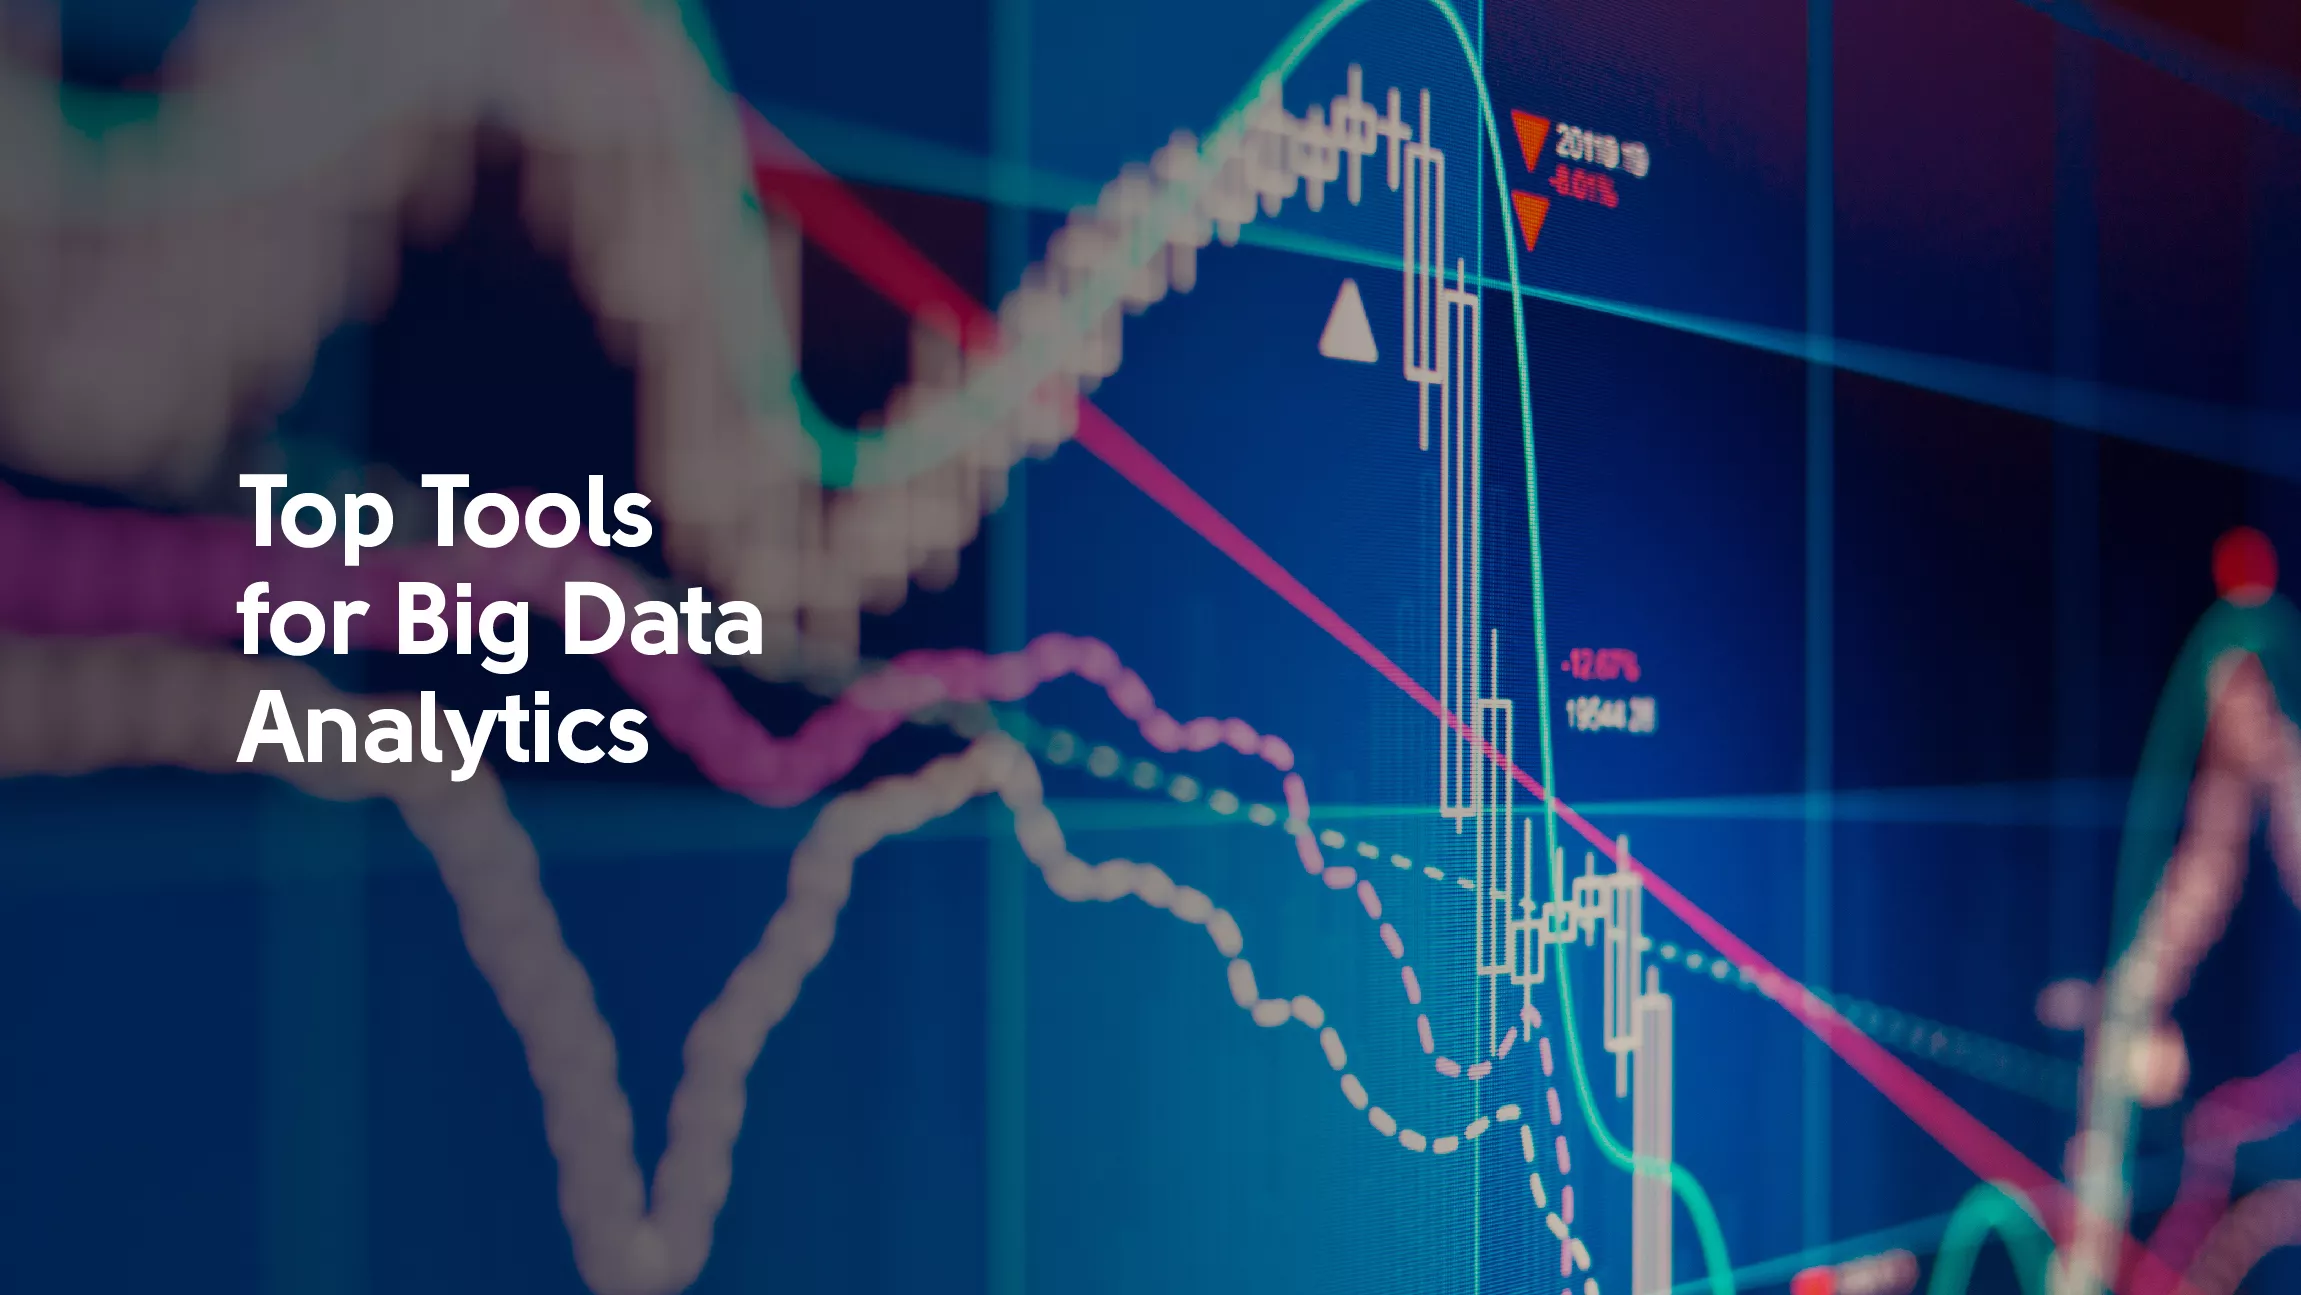 Top Tools for Big Data Analytics